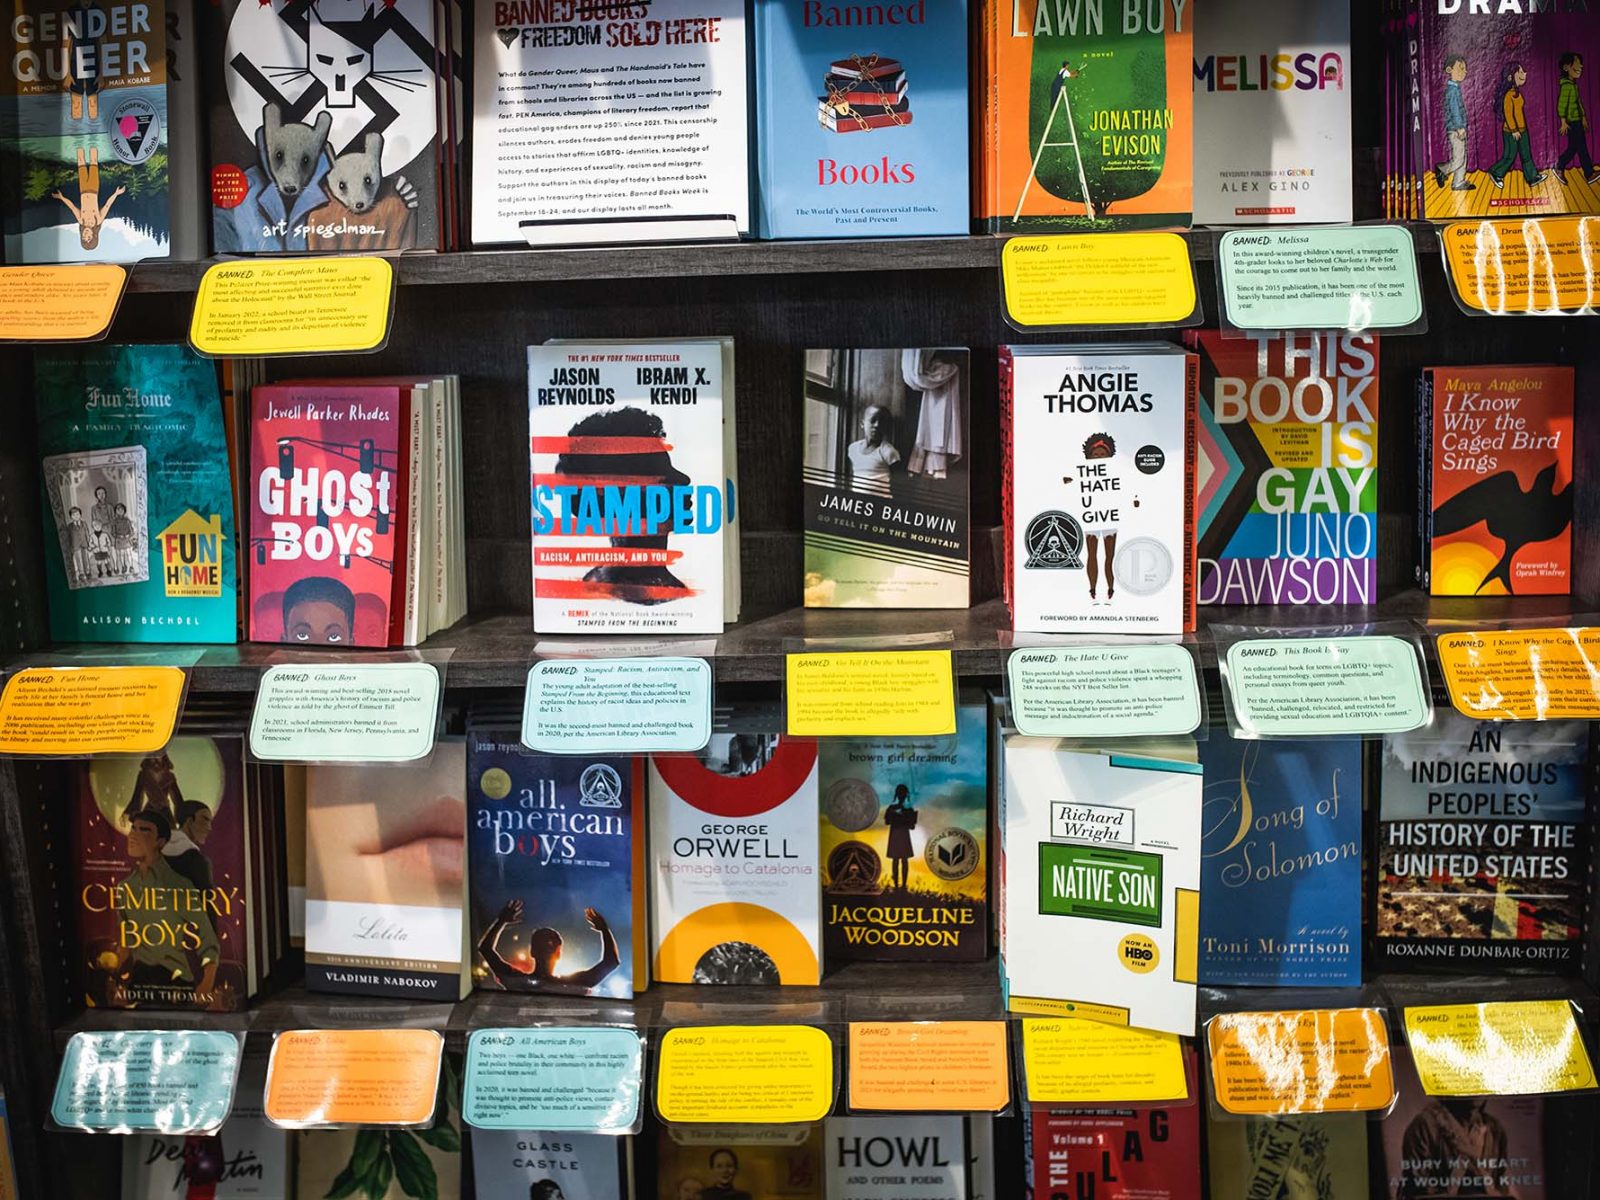 School Porn Pov - Want to Find a Banned Book? Brookline Booksmith Has Some on Display | BU  Today | Boston University